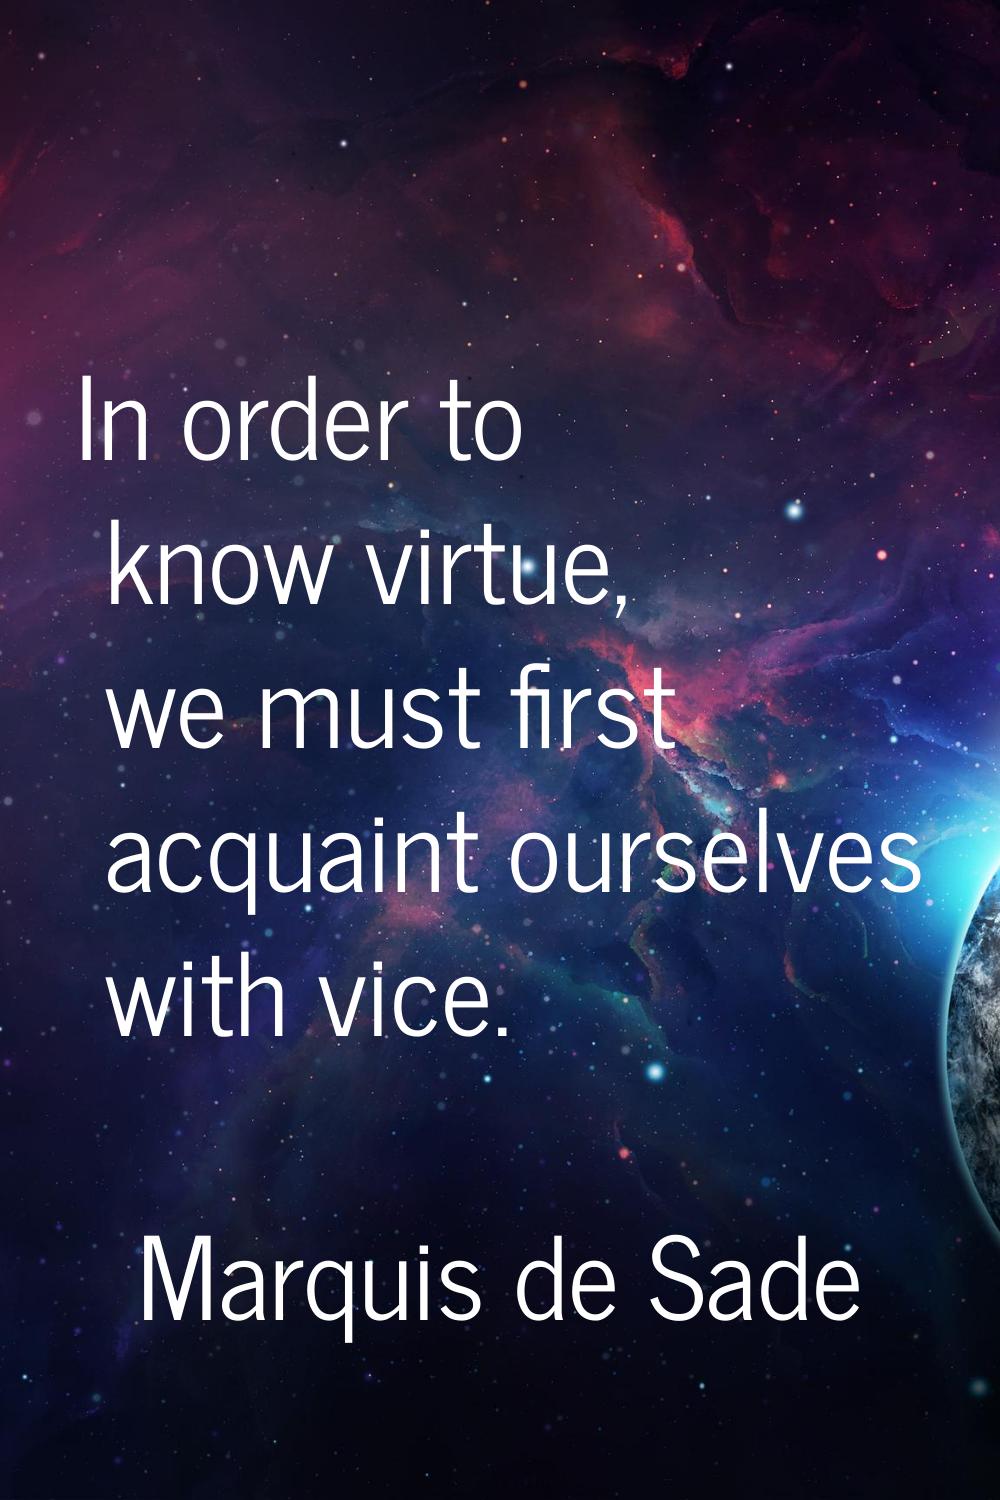 In order to know virtue, we must first acquaint ourselves with vice.